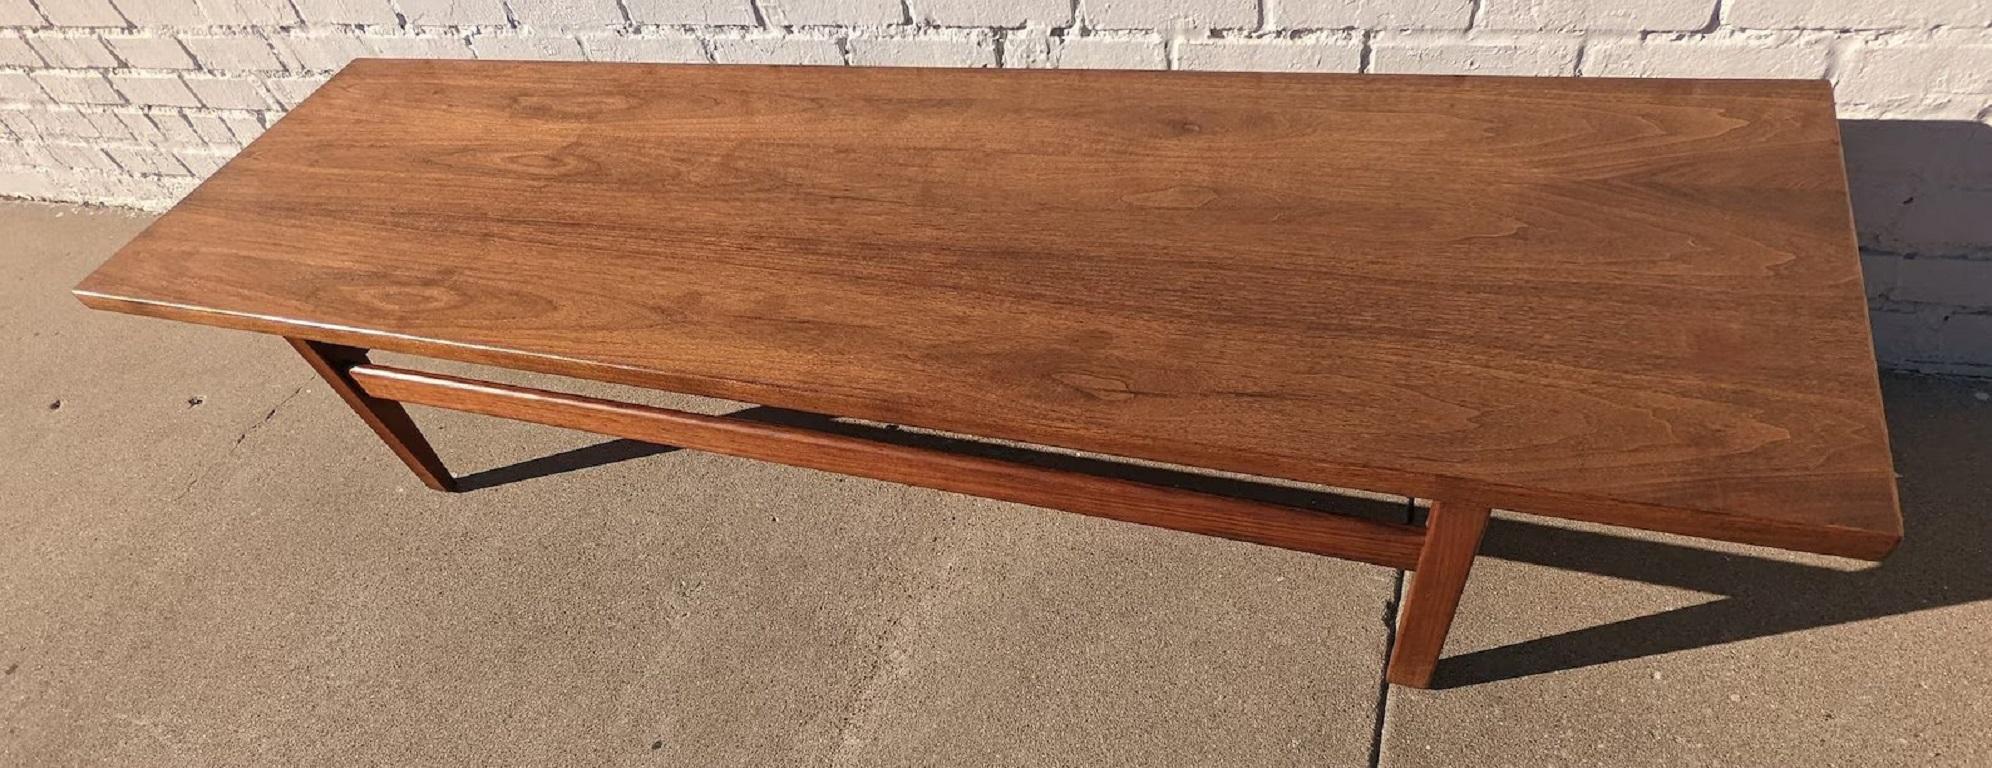 Mid Century Modern Jens Risom Walnut Coffee Table
Above average vintage condition and structurally sound. Table has been refinished and doea have small areas where the veneer has been sanded through.
Additional information:
Materials: walnut Vintage